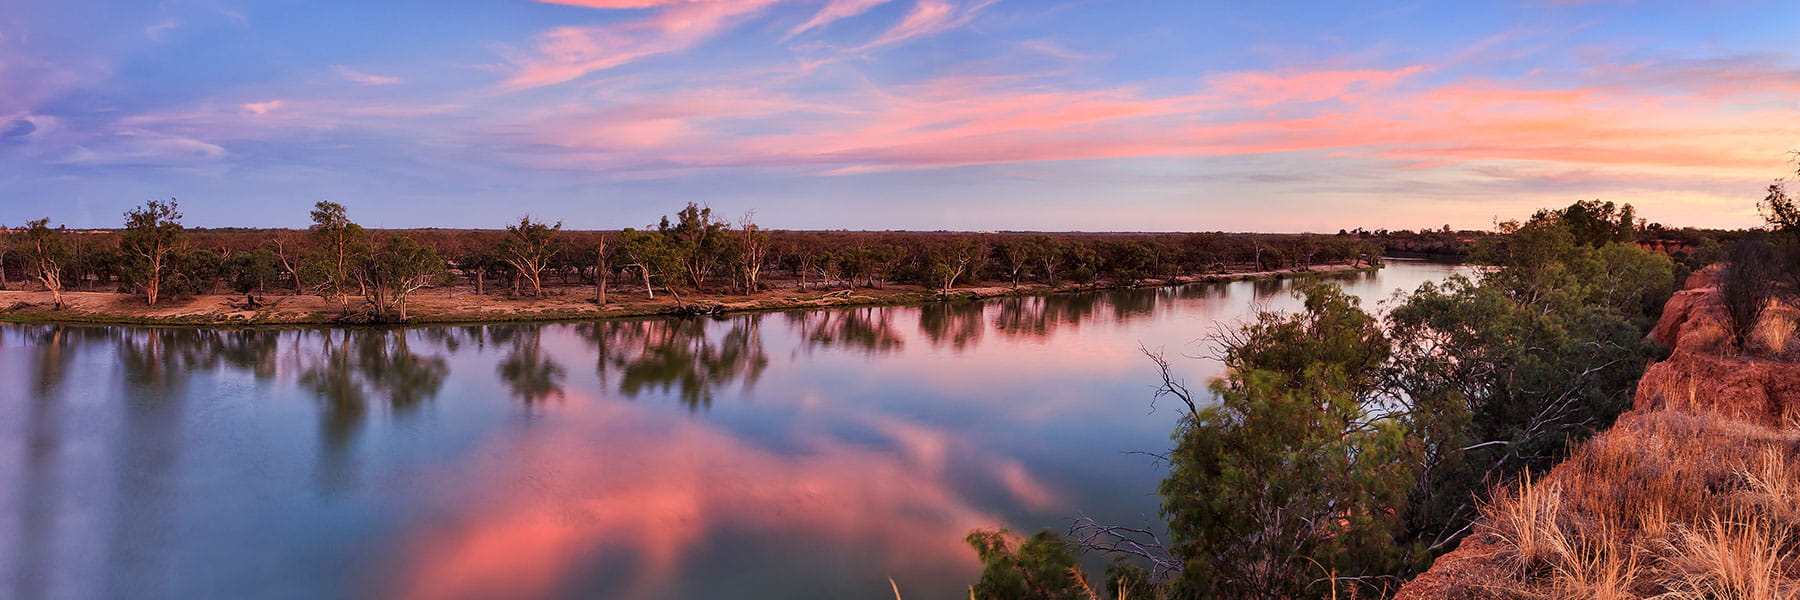 River in the outback of Australia